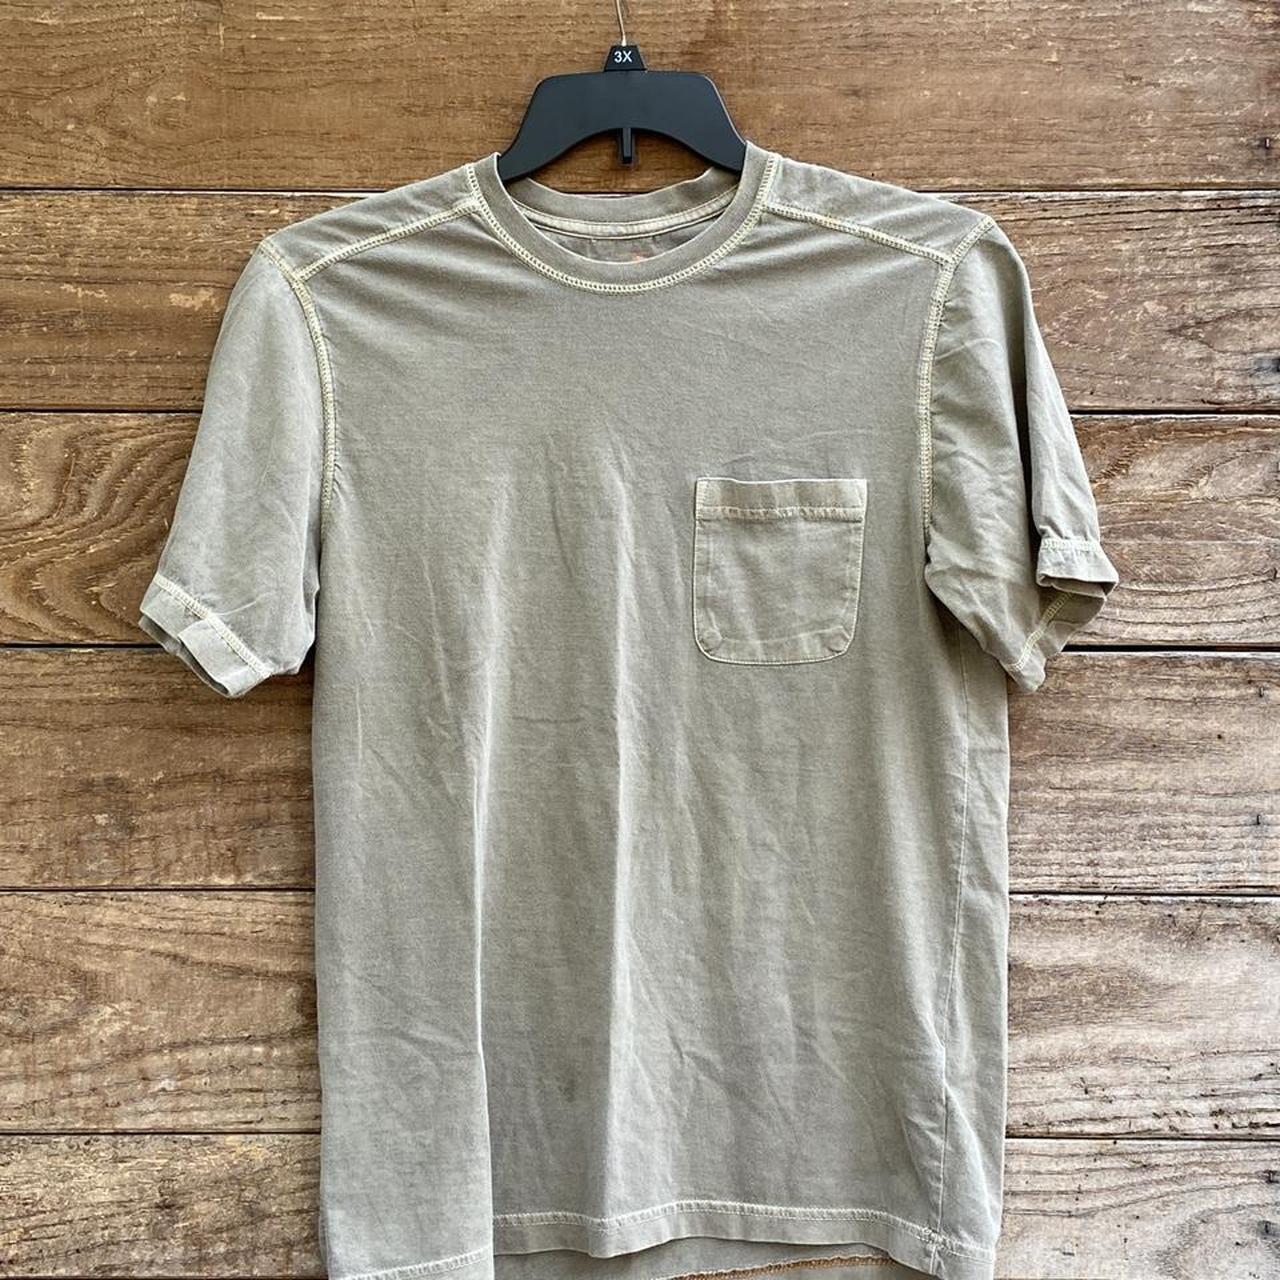 Product Image 1 - CLEAN MIDWEST SHIRT-KHAKI COLOR
FITS WELL-